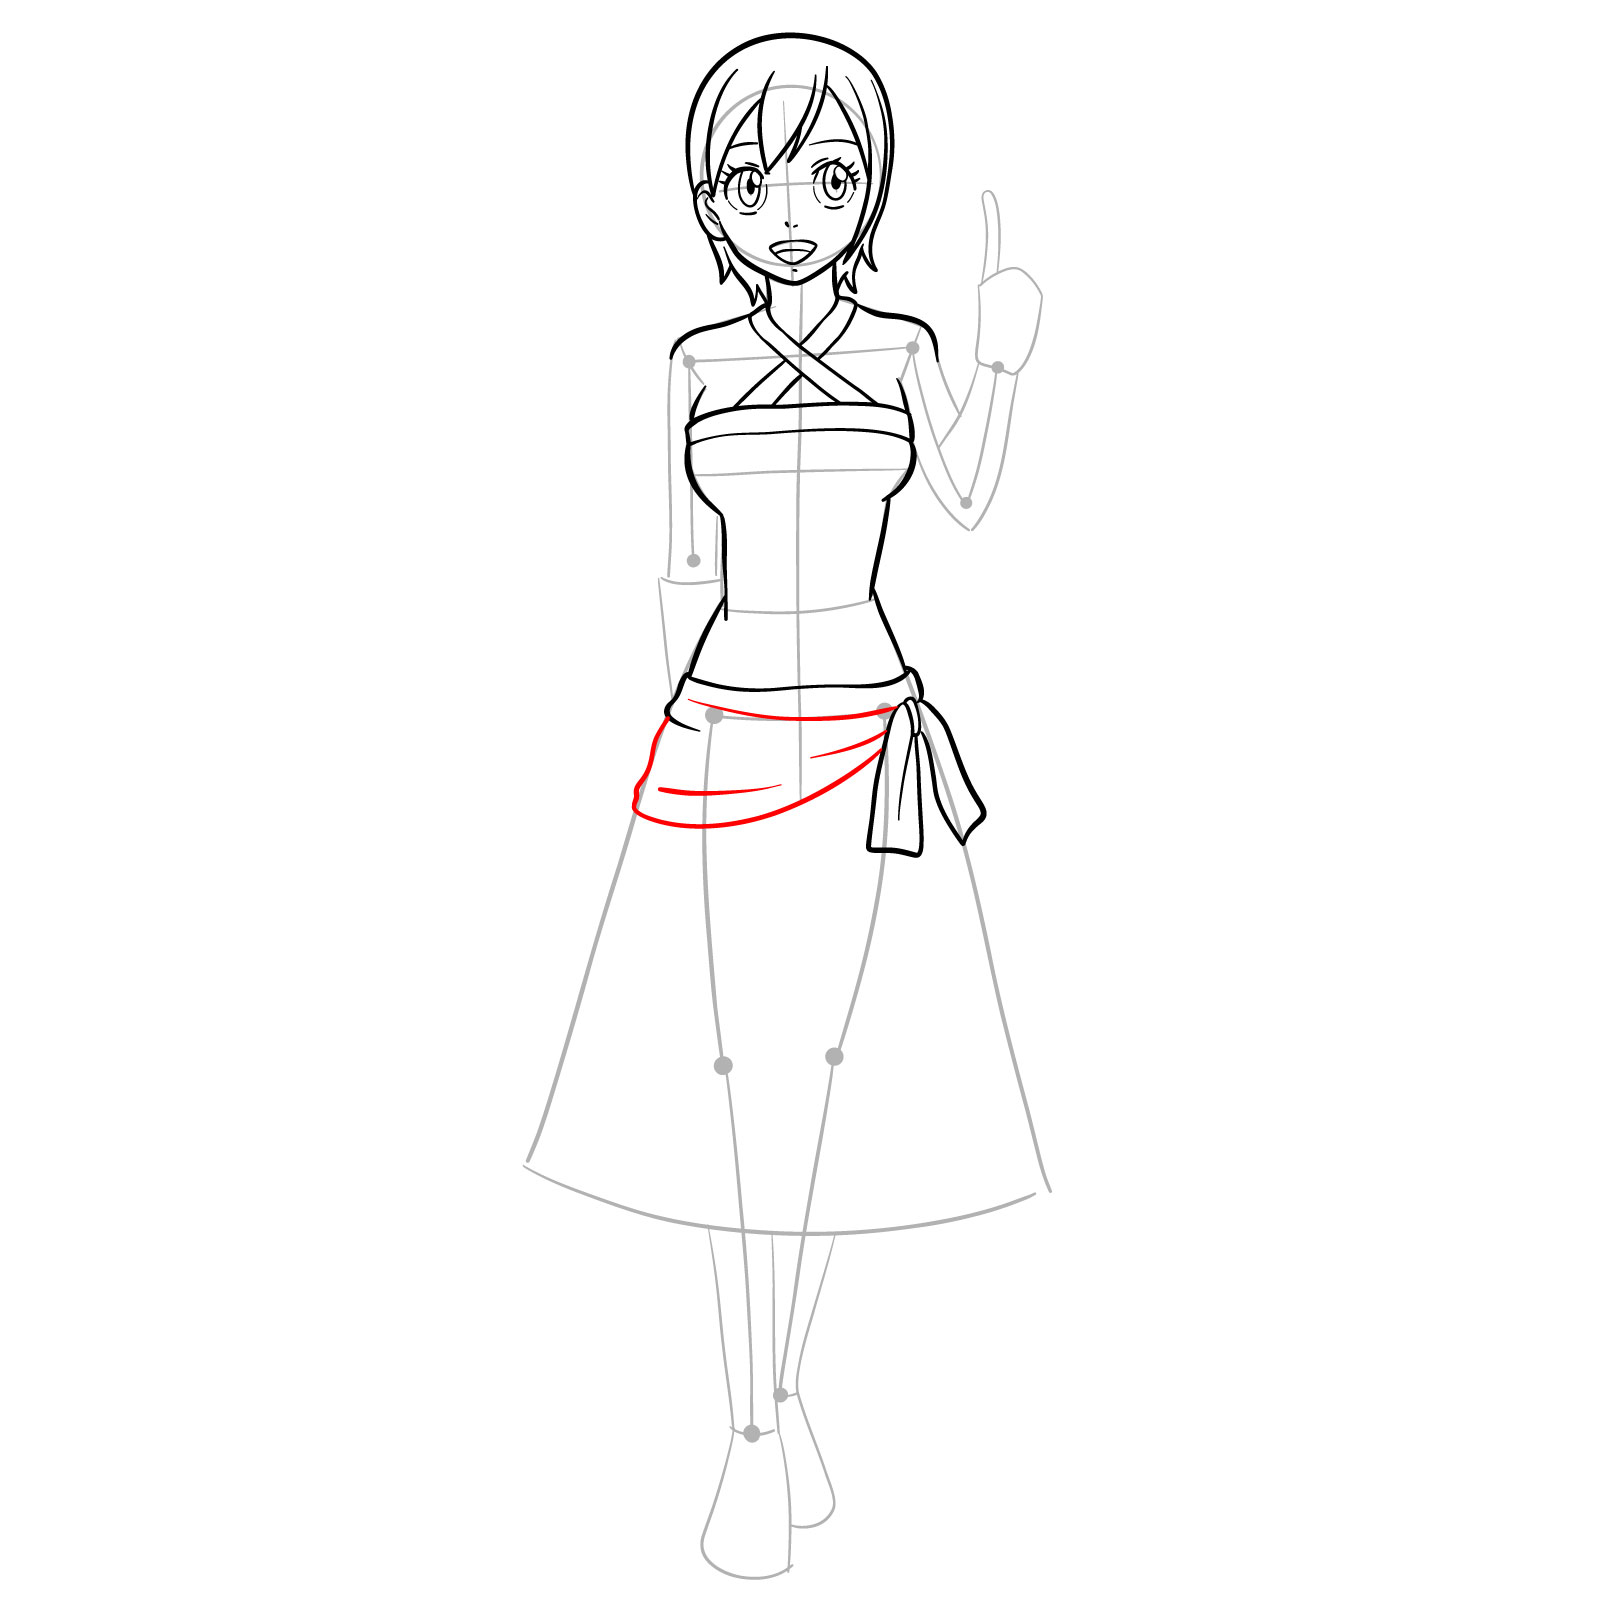 How to draw Lisanna Strauss from Fairy Tail - step 19